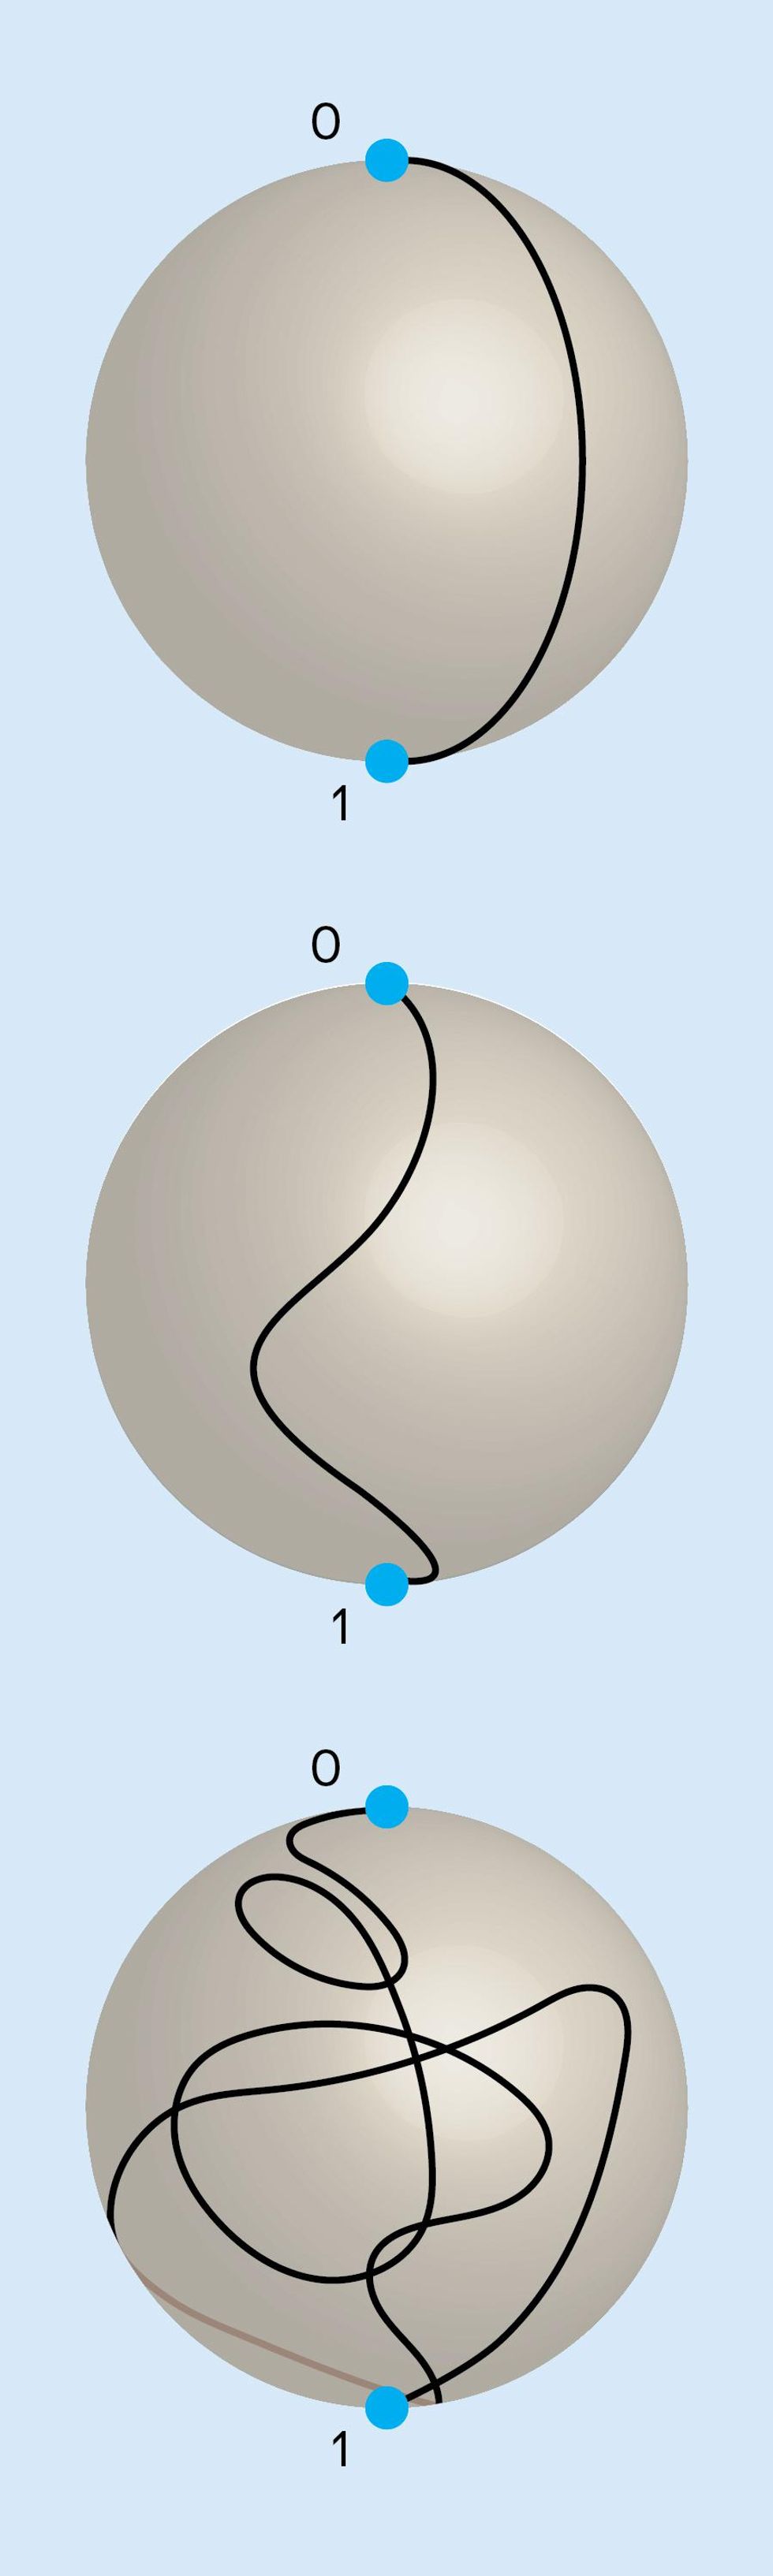 Three spheres showing paths of optimized qubit flips.